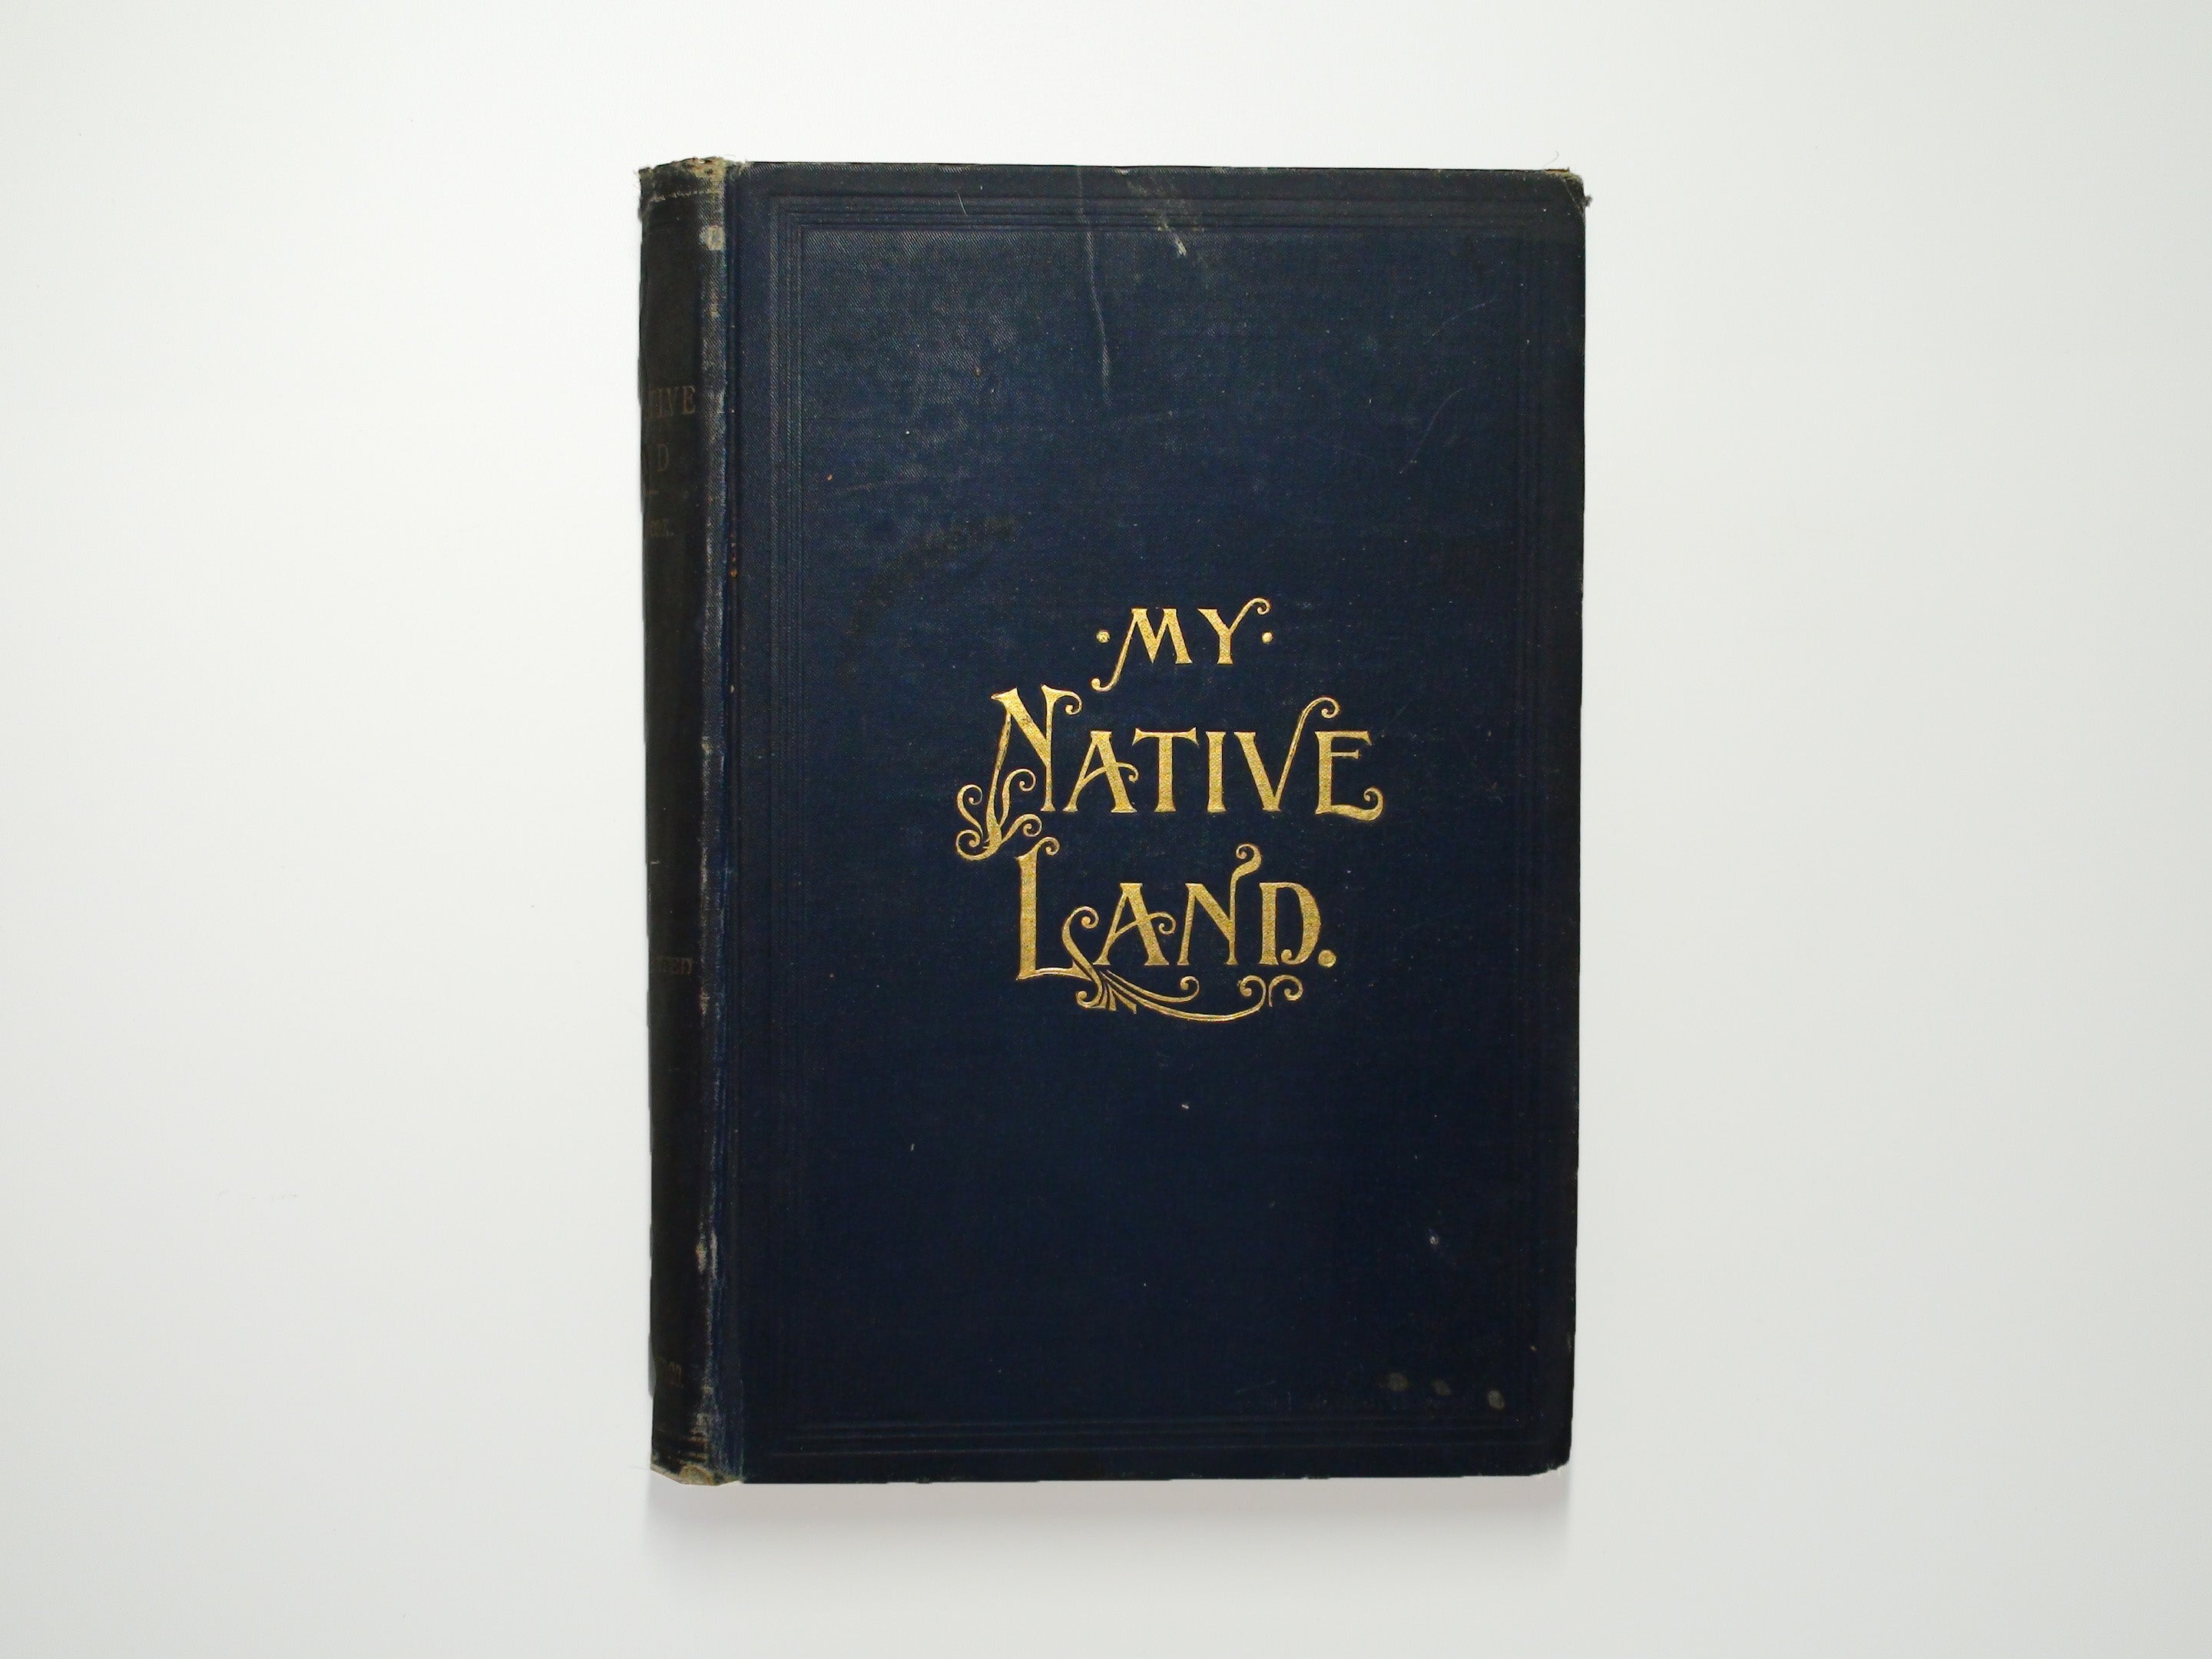 My Native Land, by James Cox, Illustrated, 1st Ed, Poor Condition, 1895